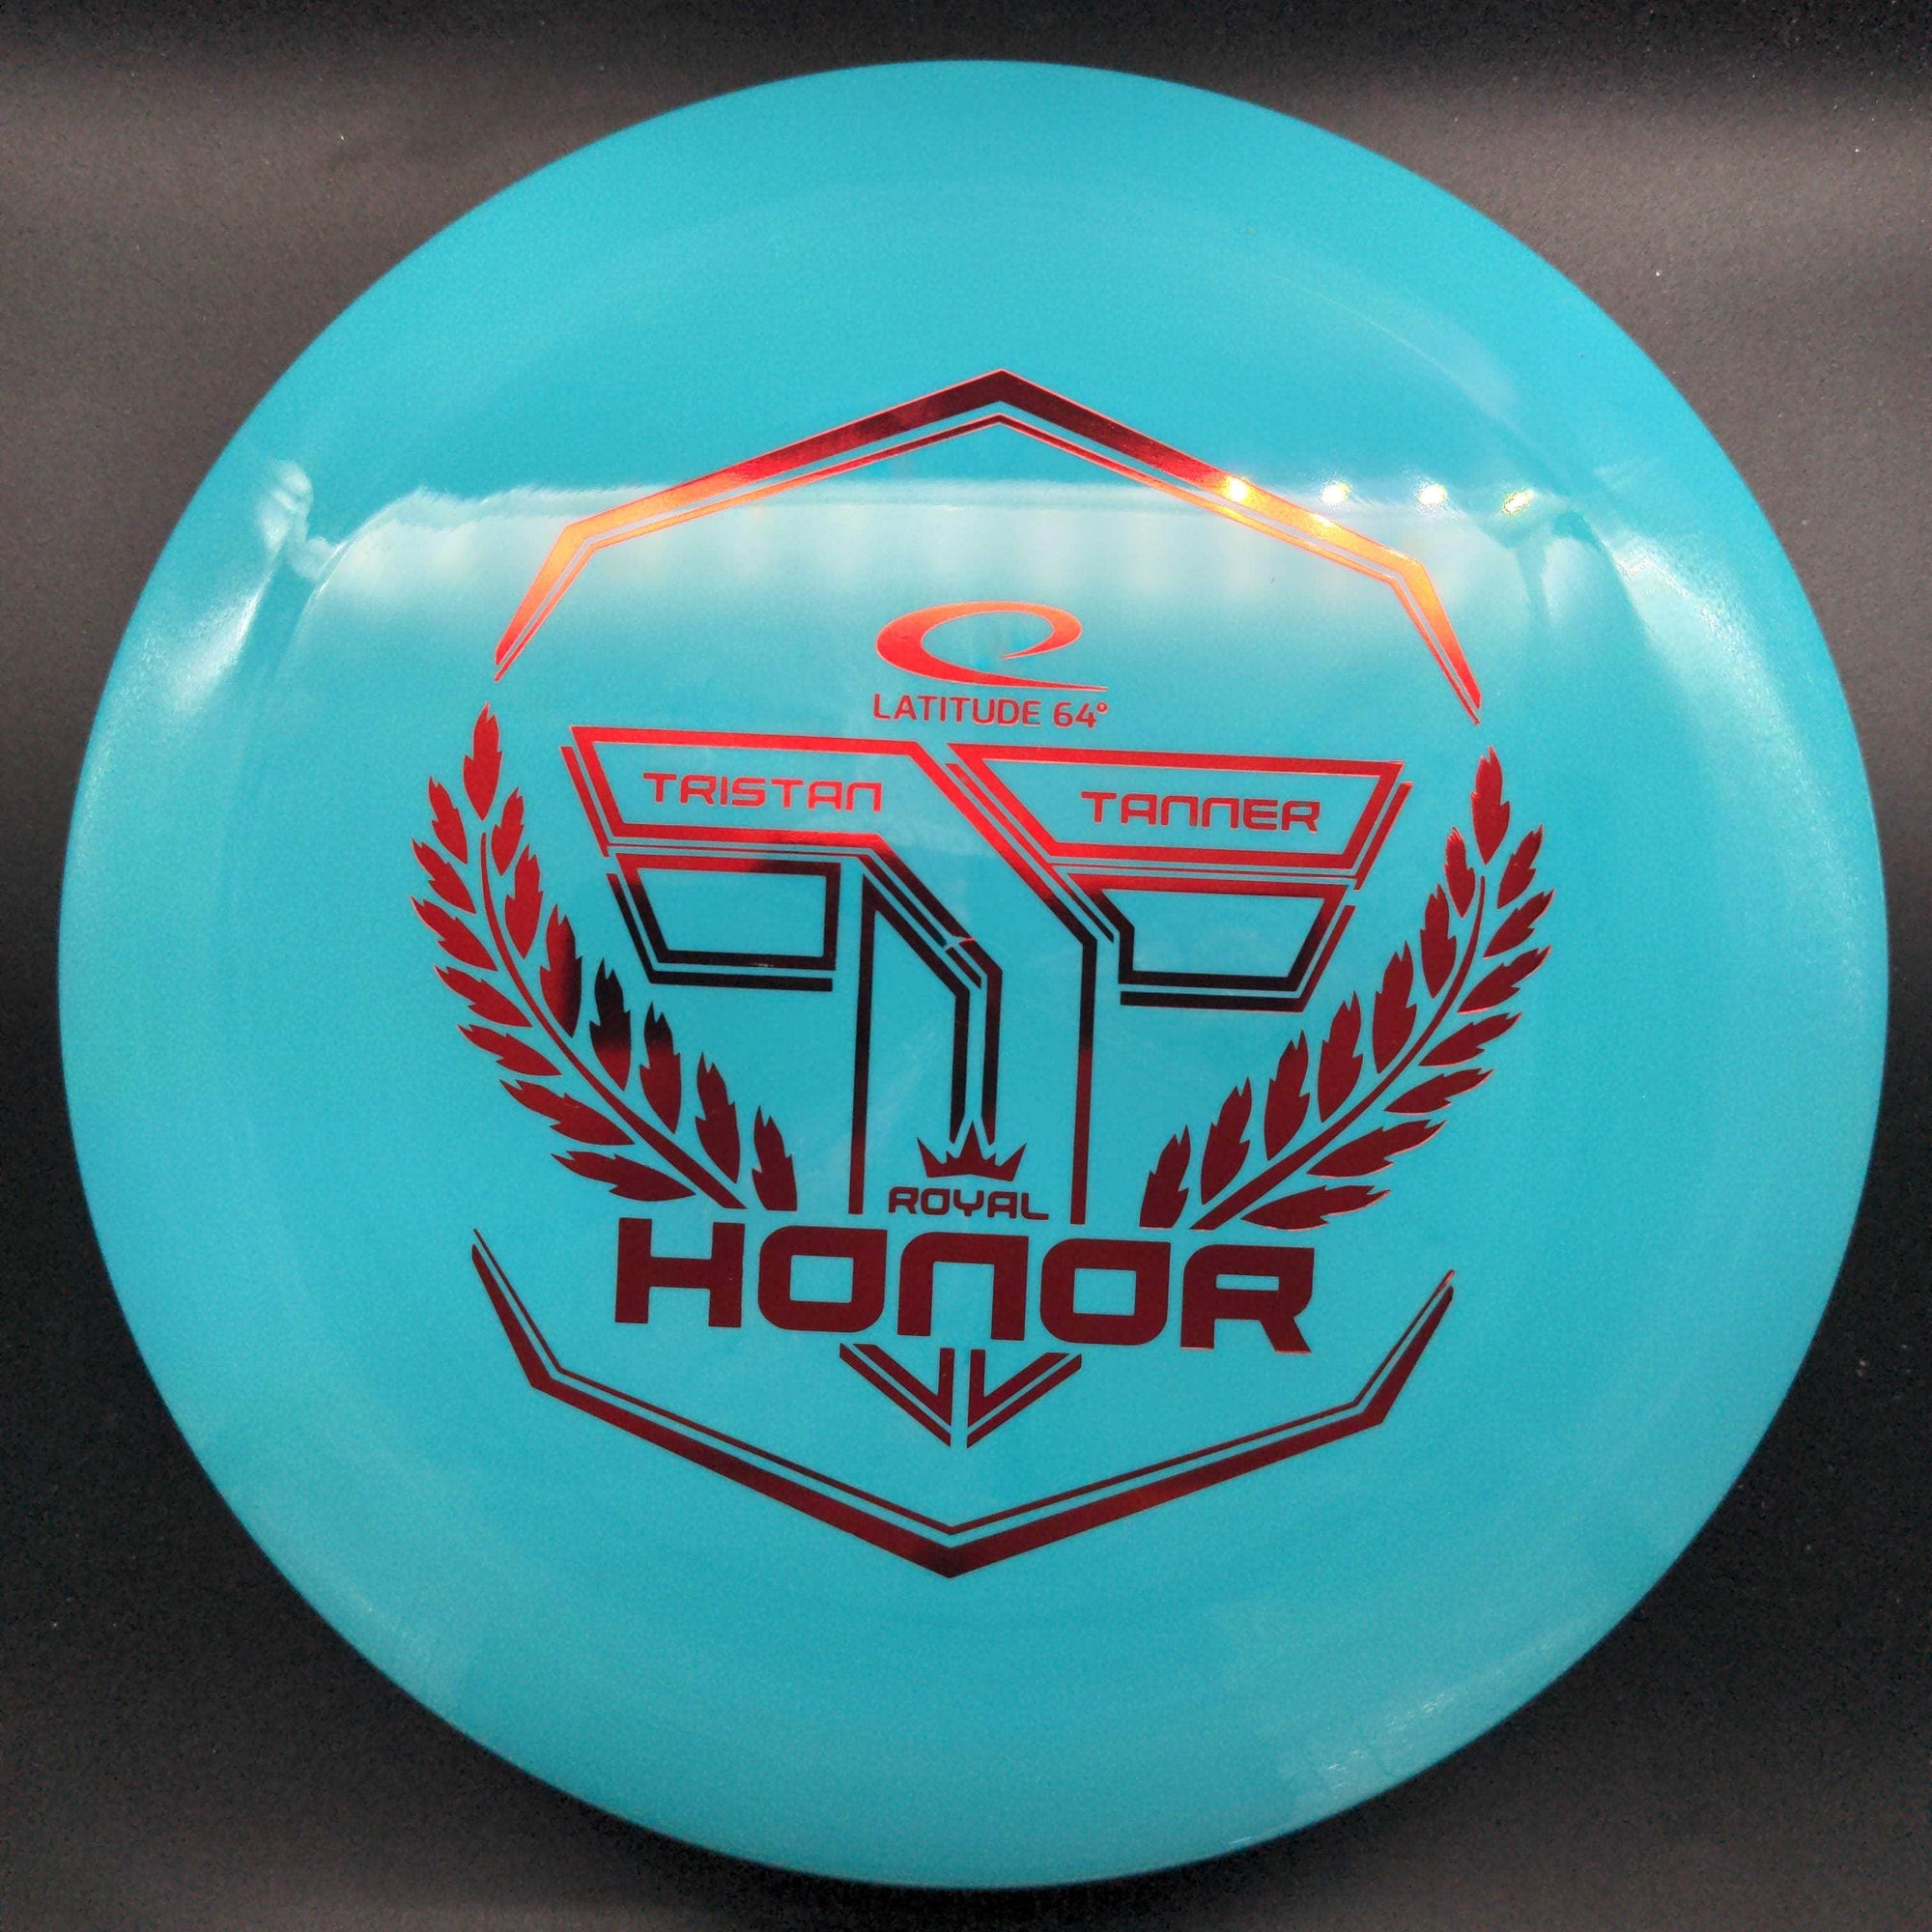 Latitude 64 Fairway Driver Teal Red Stamp 175g Honor, Royal Grand, Tristan Tanner 2023